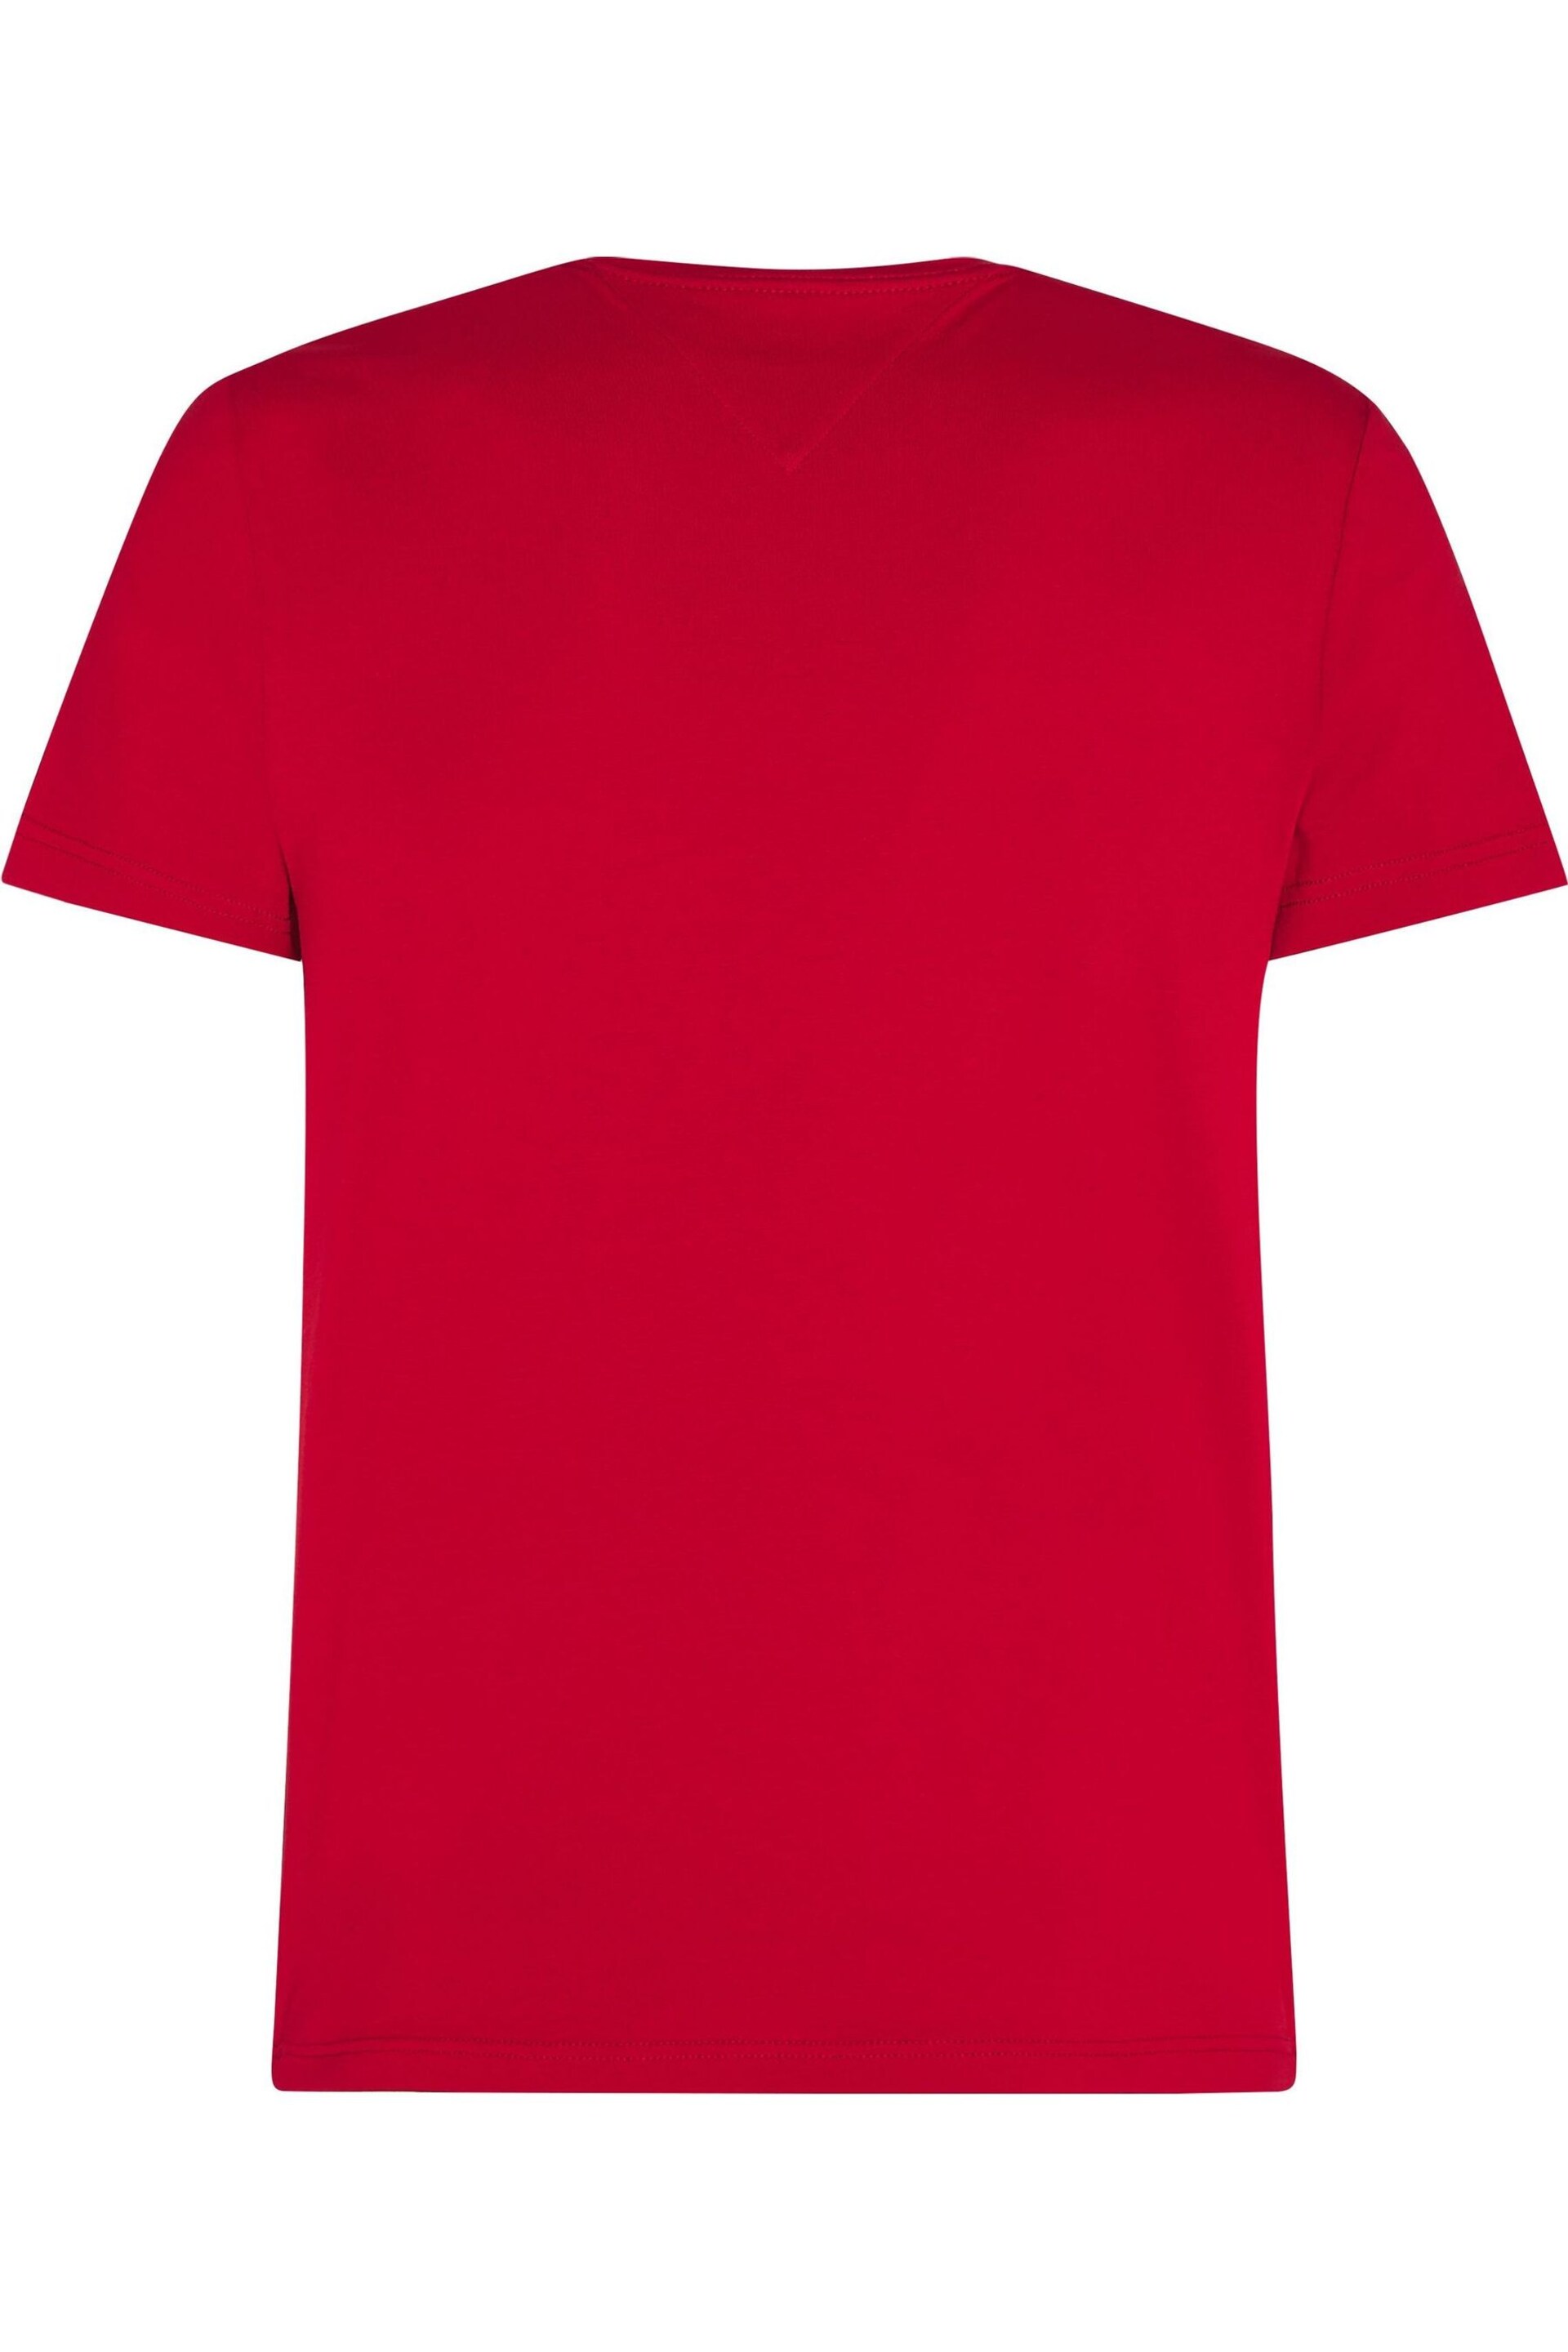 Tommy Hilfiger Core Stretch Slim Fit Crew Neck T-Shirt - Image 2 of 6